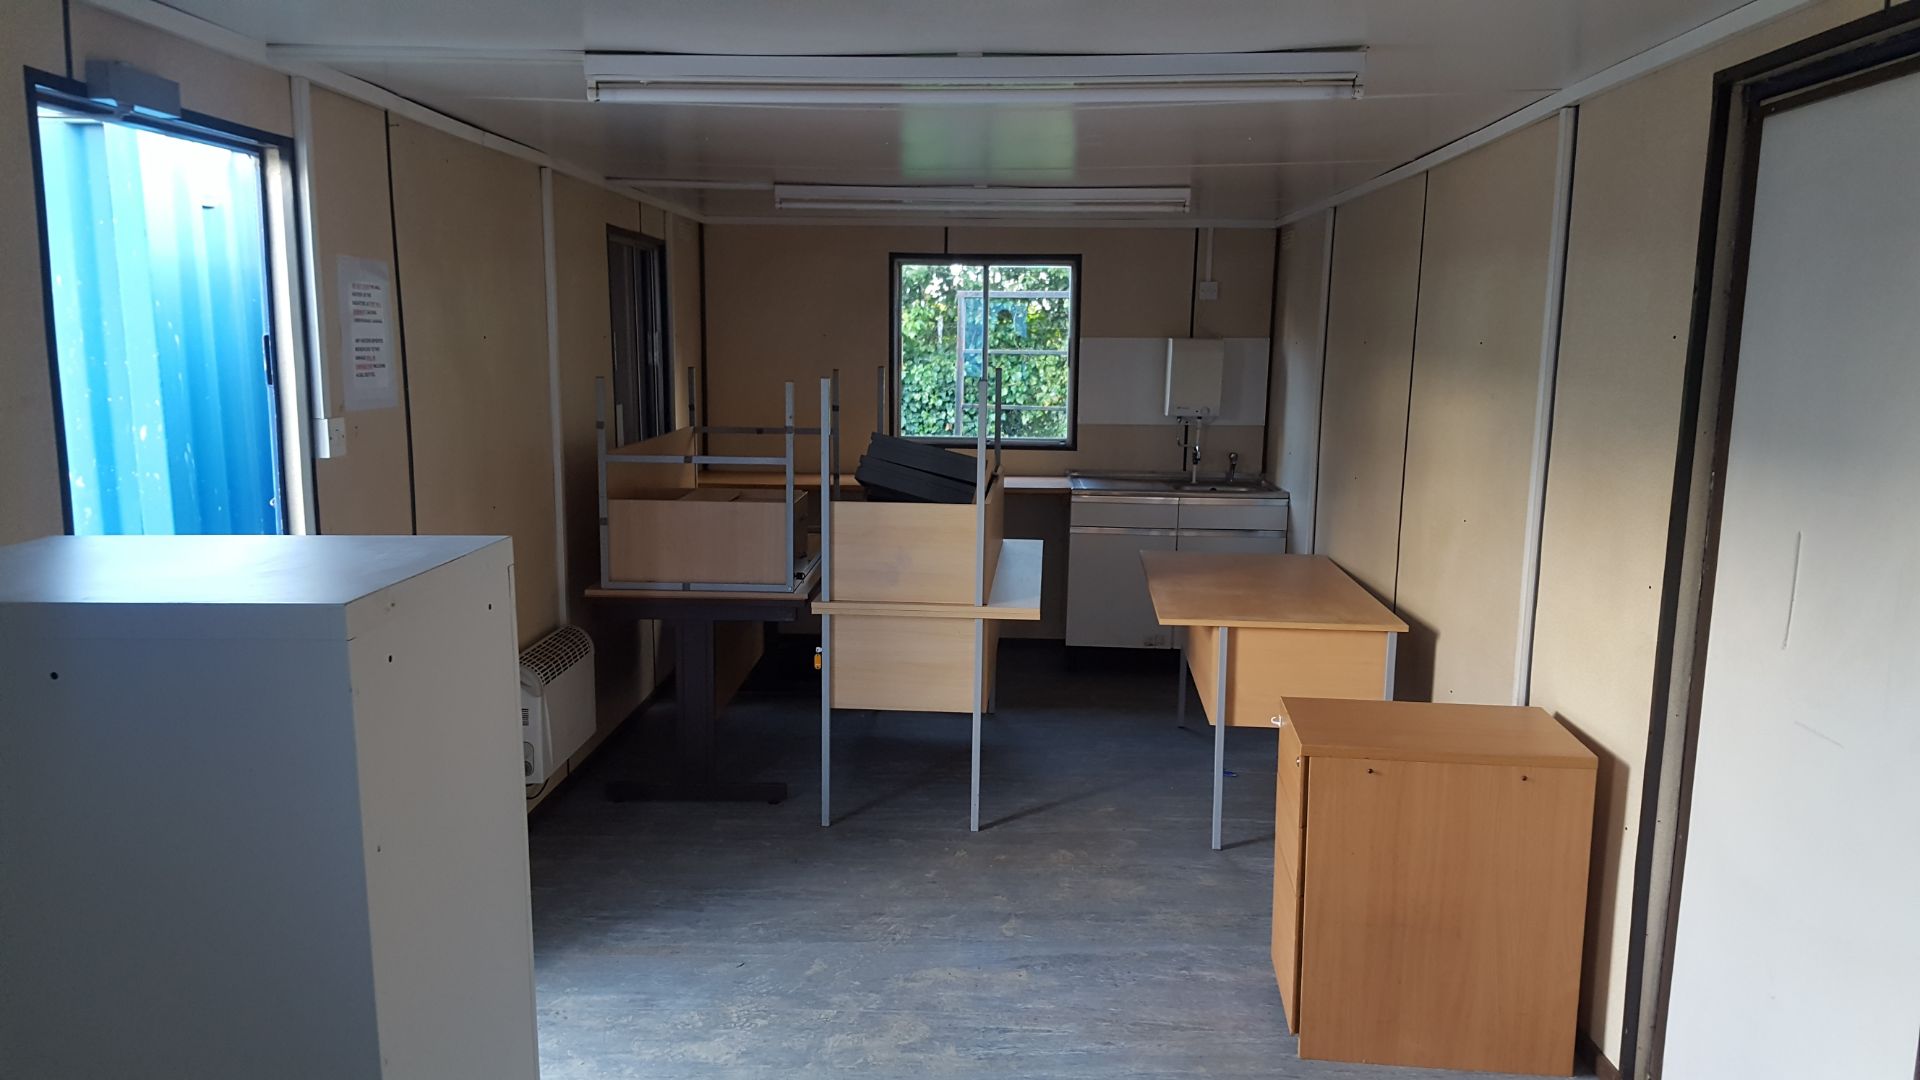 30 x 10 Anti Vandal Office / Canteen / Container - Image 4 of 8